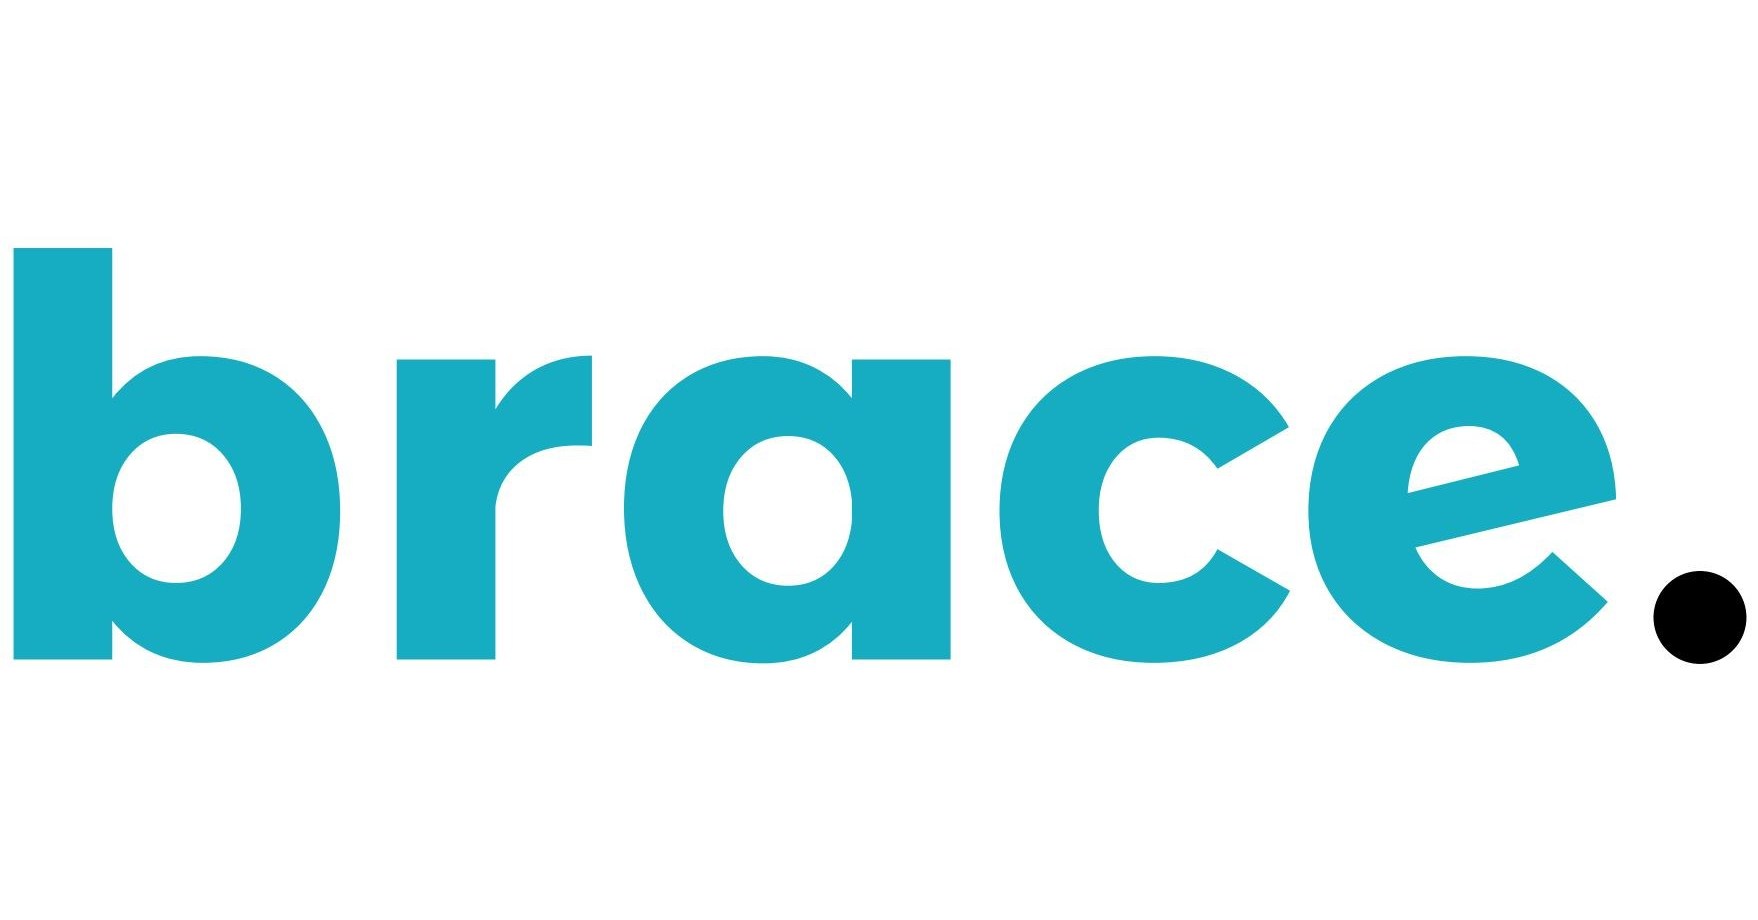 Ocrolus has announced a partnership with Brace, developer of a loss mitigation platform for mortgage lenders and servicers